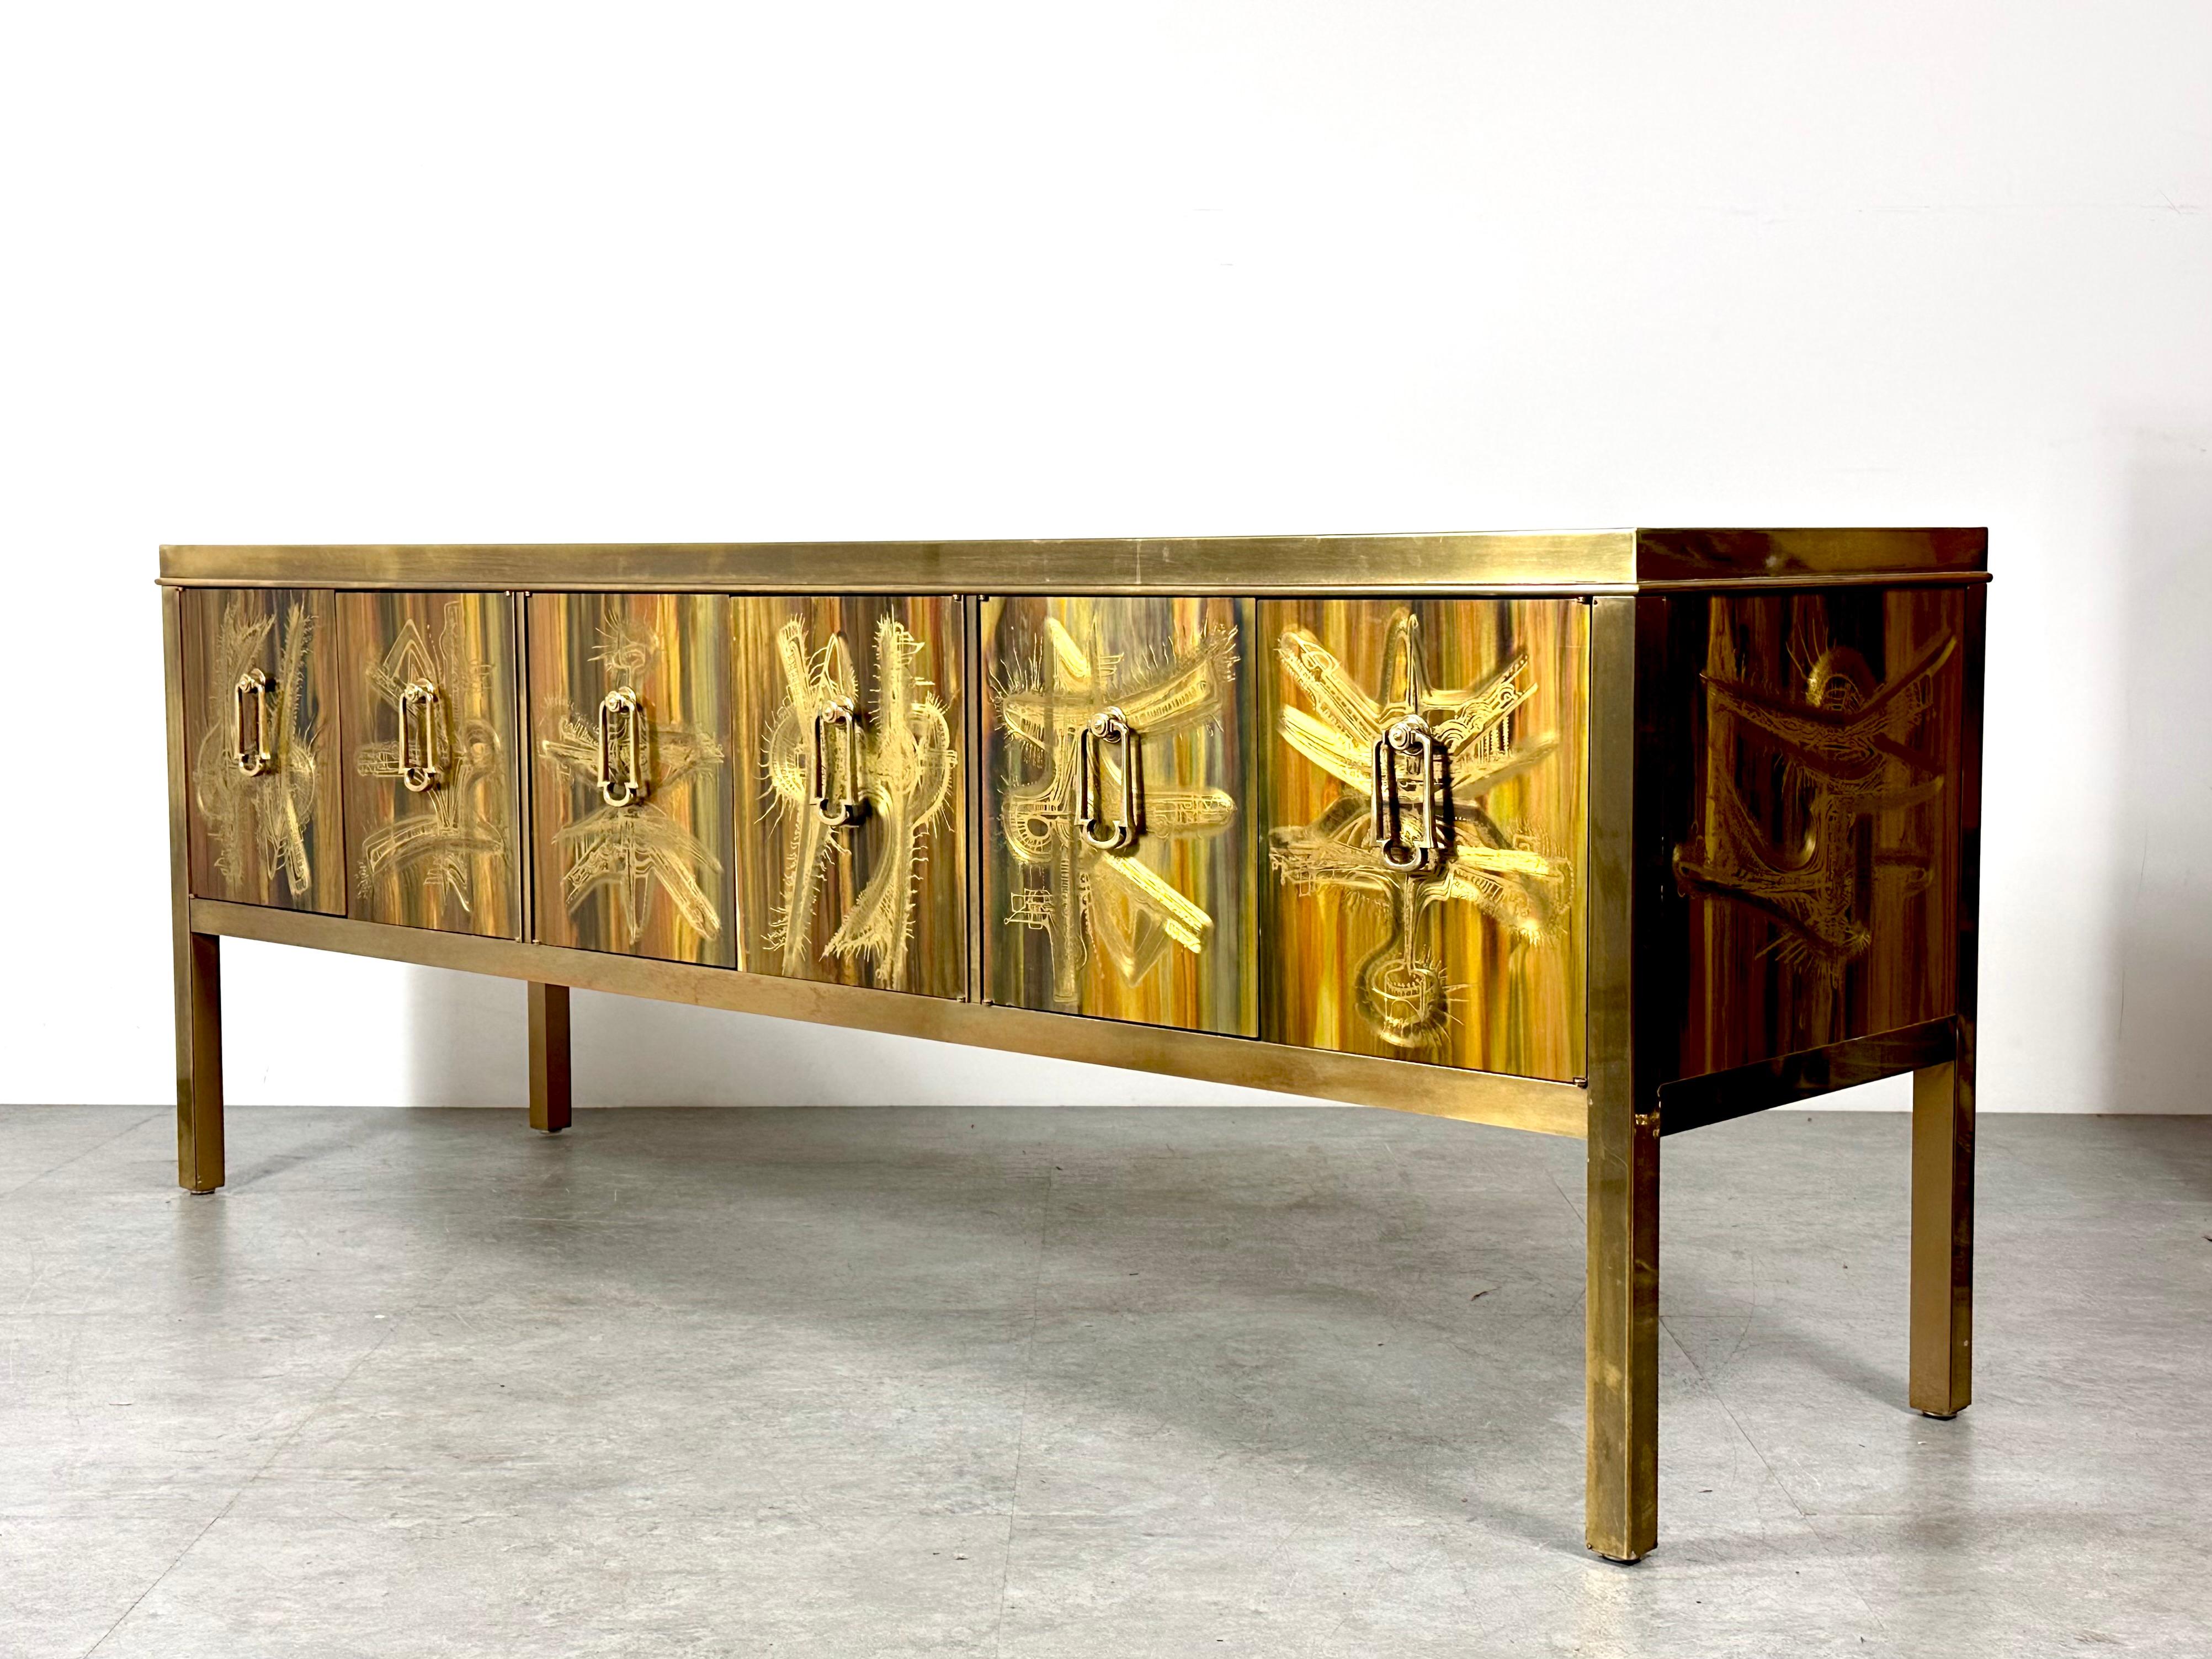 Exquisite six door sideboard designed by Berhnard Rohne for Mastercraft circa 1970s

The cabinet features Rohne's signature acid etched panel work framed in burnished brass with solid hanging pulls

Finished interior storage 

Mastercraft plaque